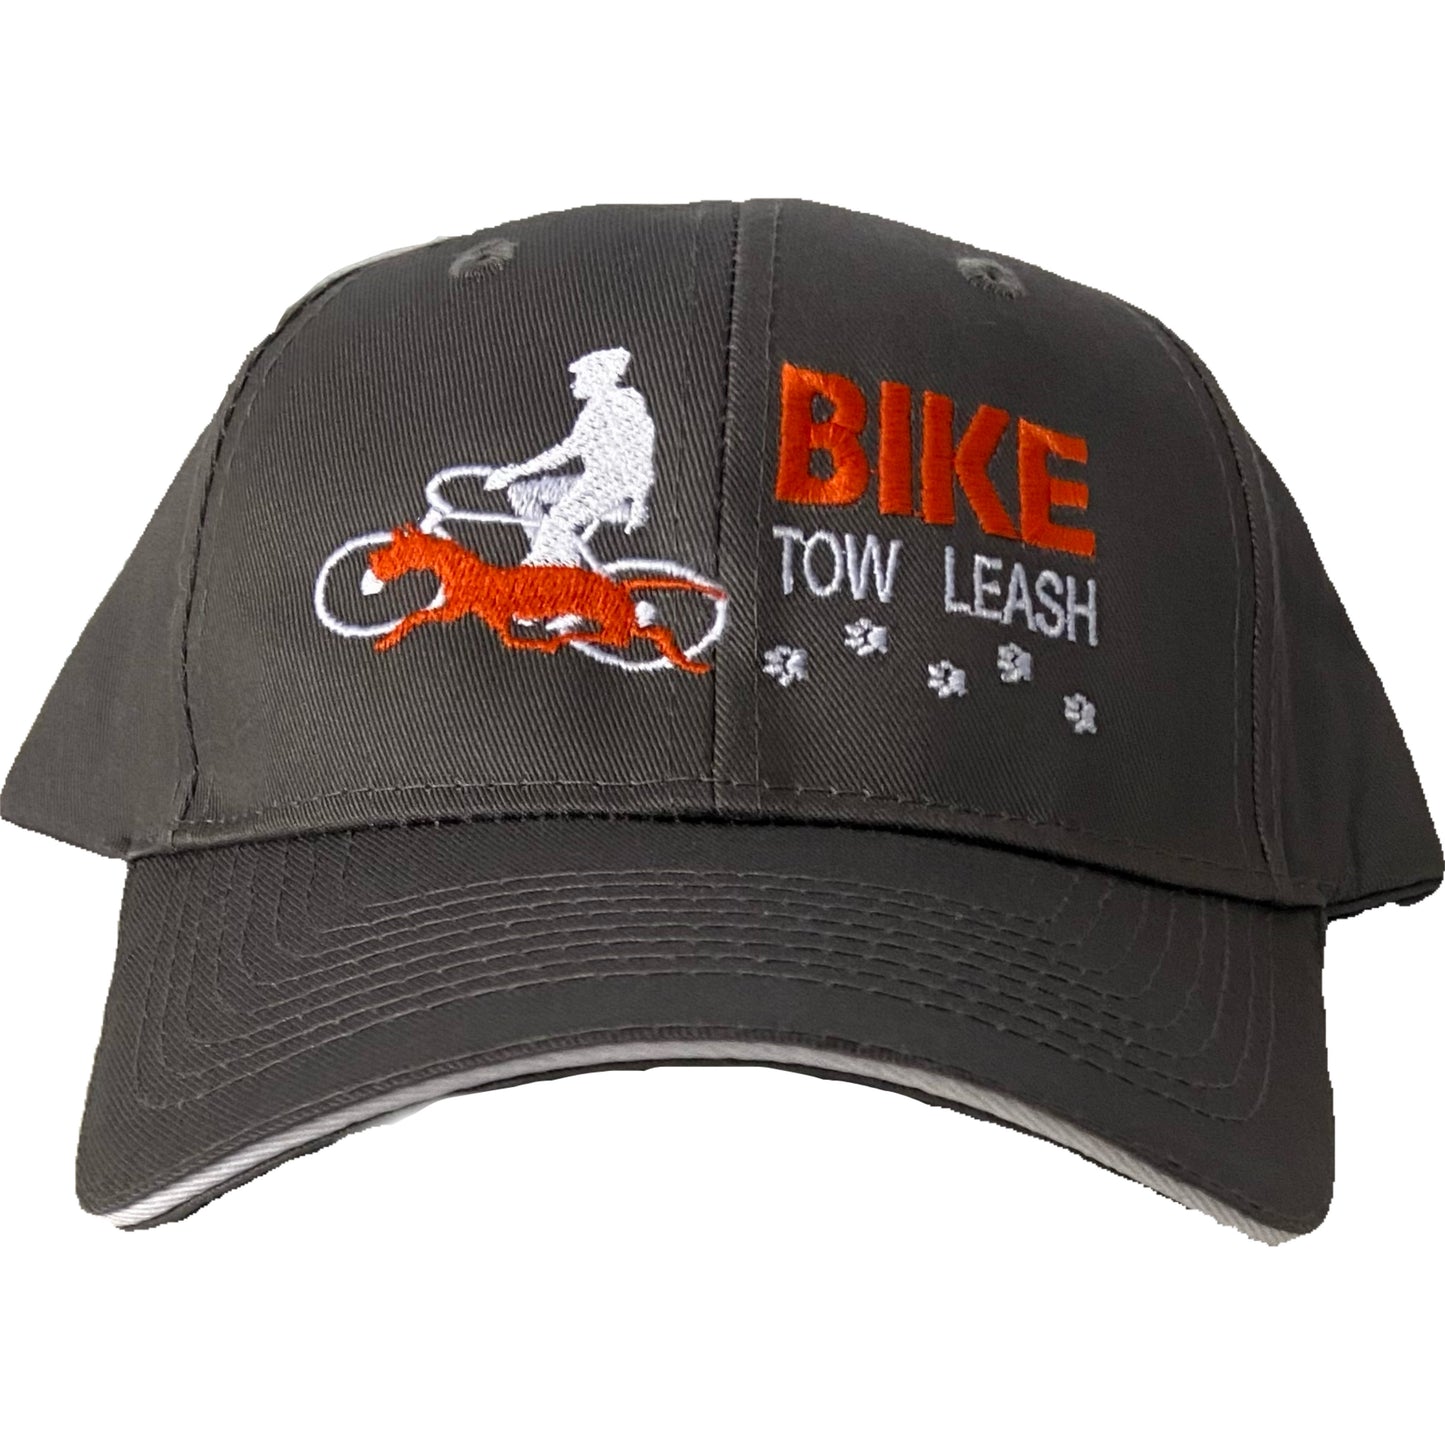 Official Bike Tow Leash Hat